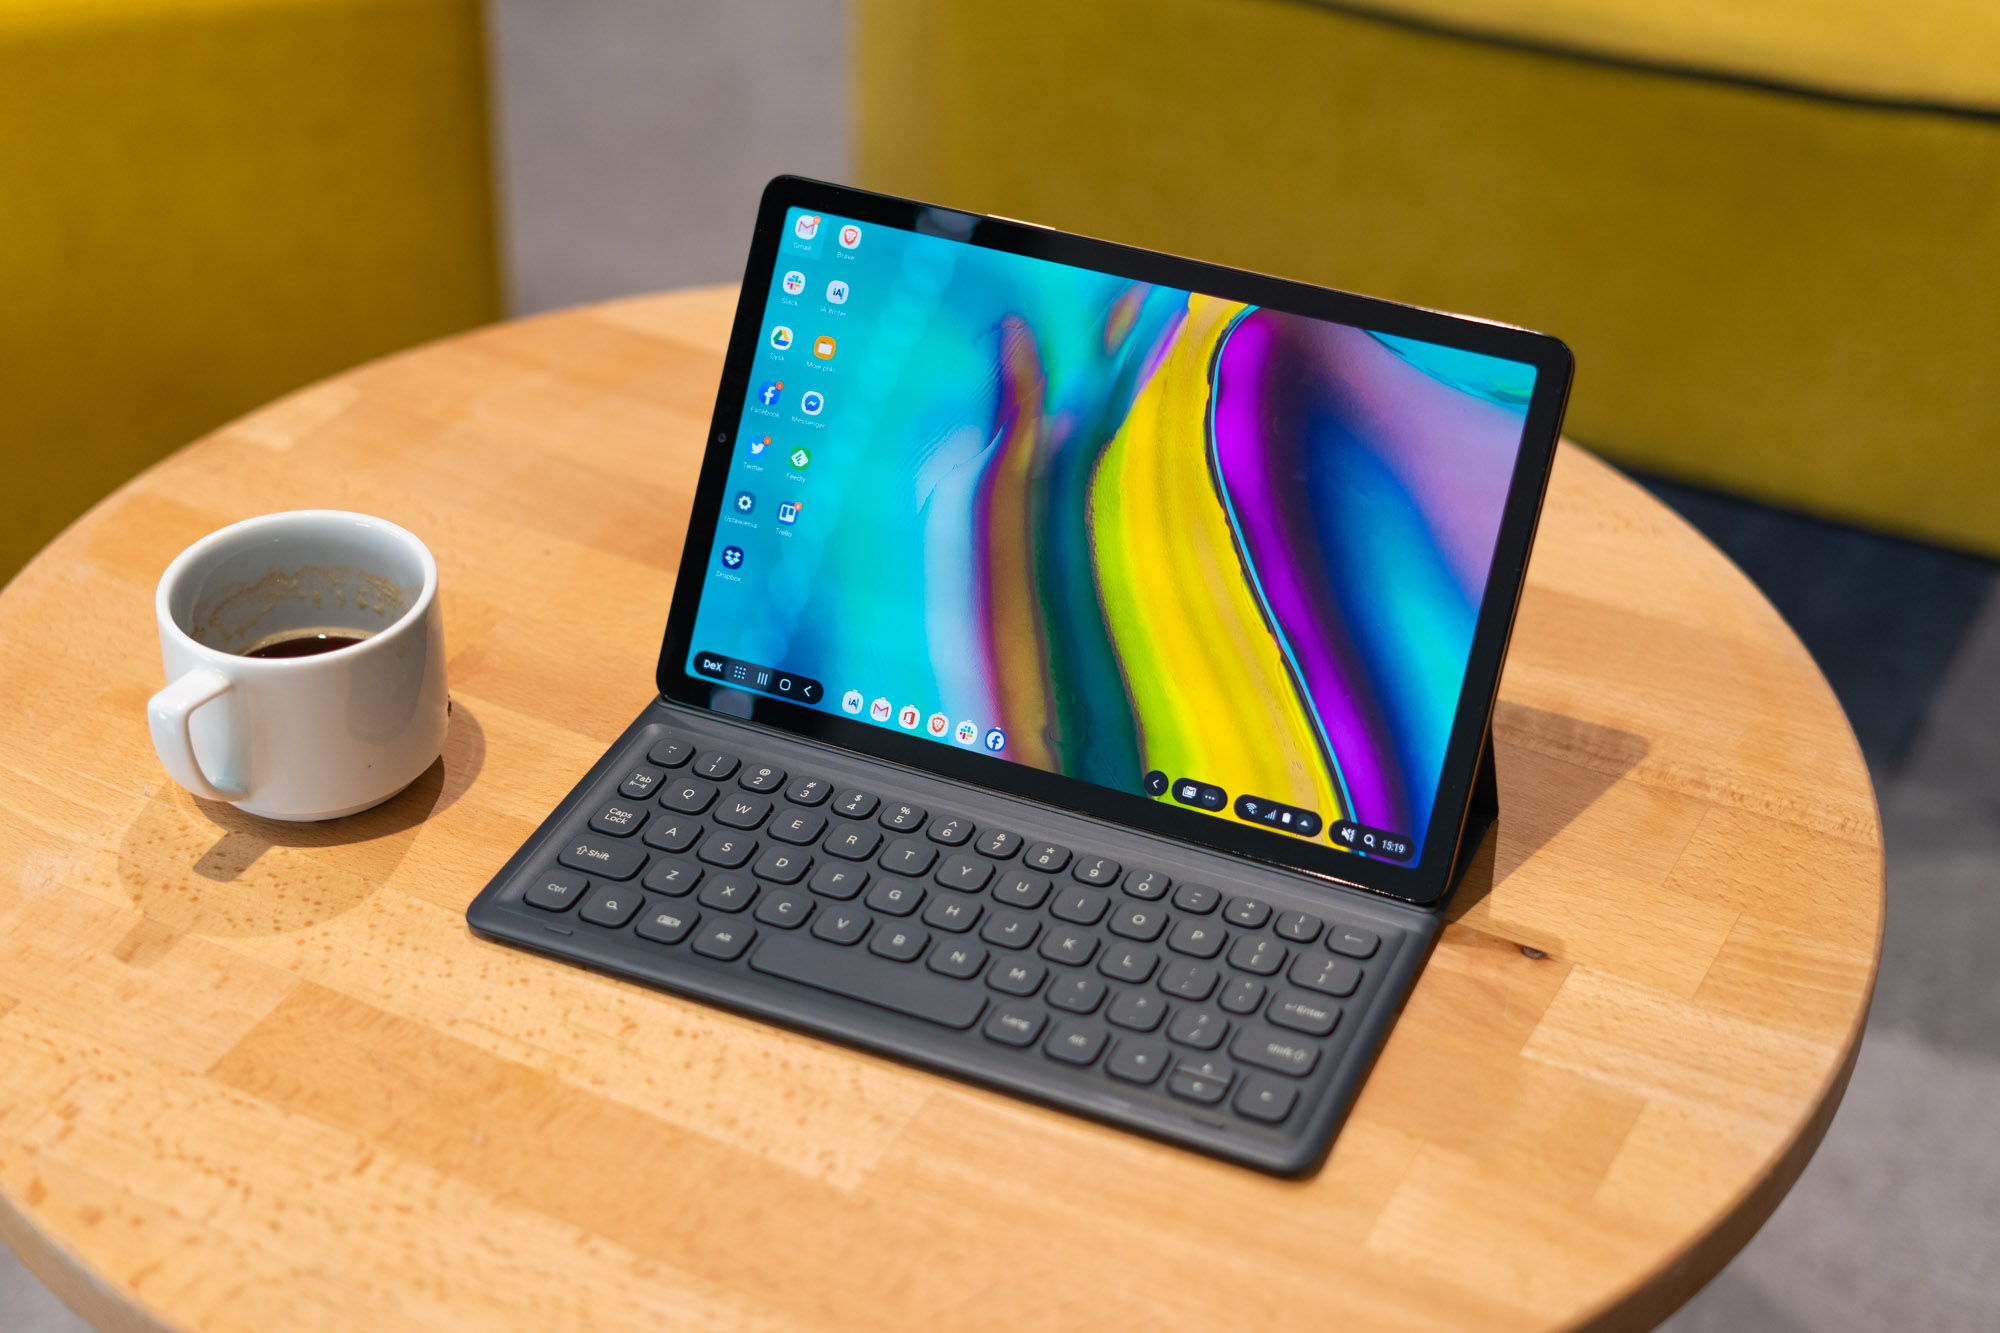 Samsung Galaxy Tab S5e is the best Android tablet. I tried to replace